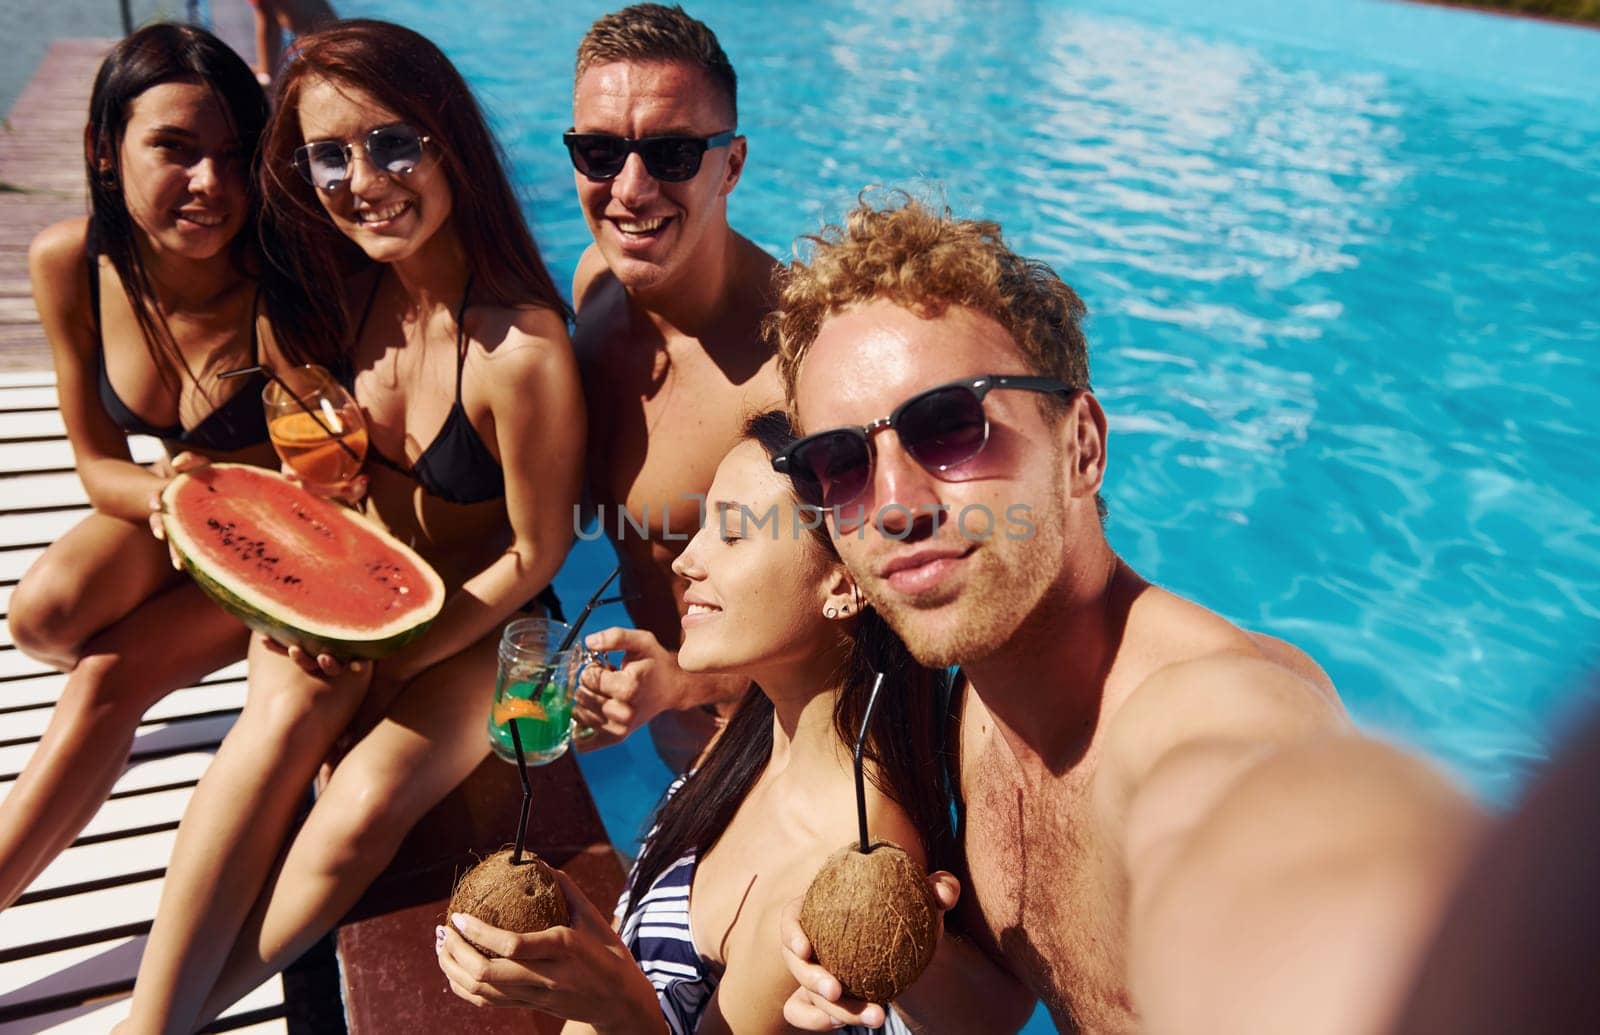 Holding watermelon. Group of young happy people have fun in swimming pool at daytime by Standret